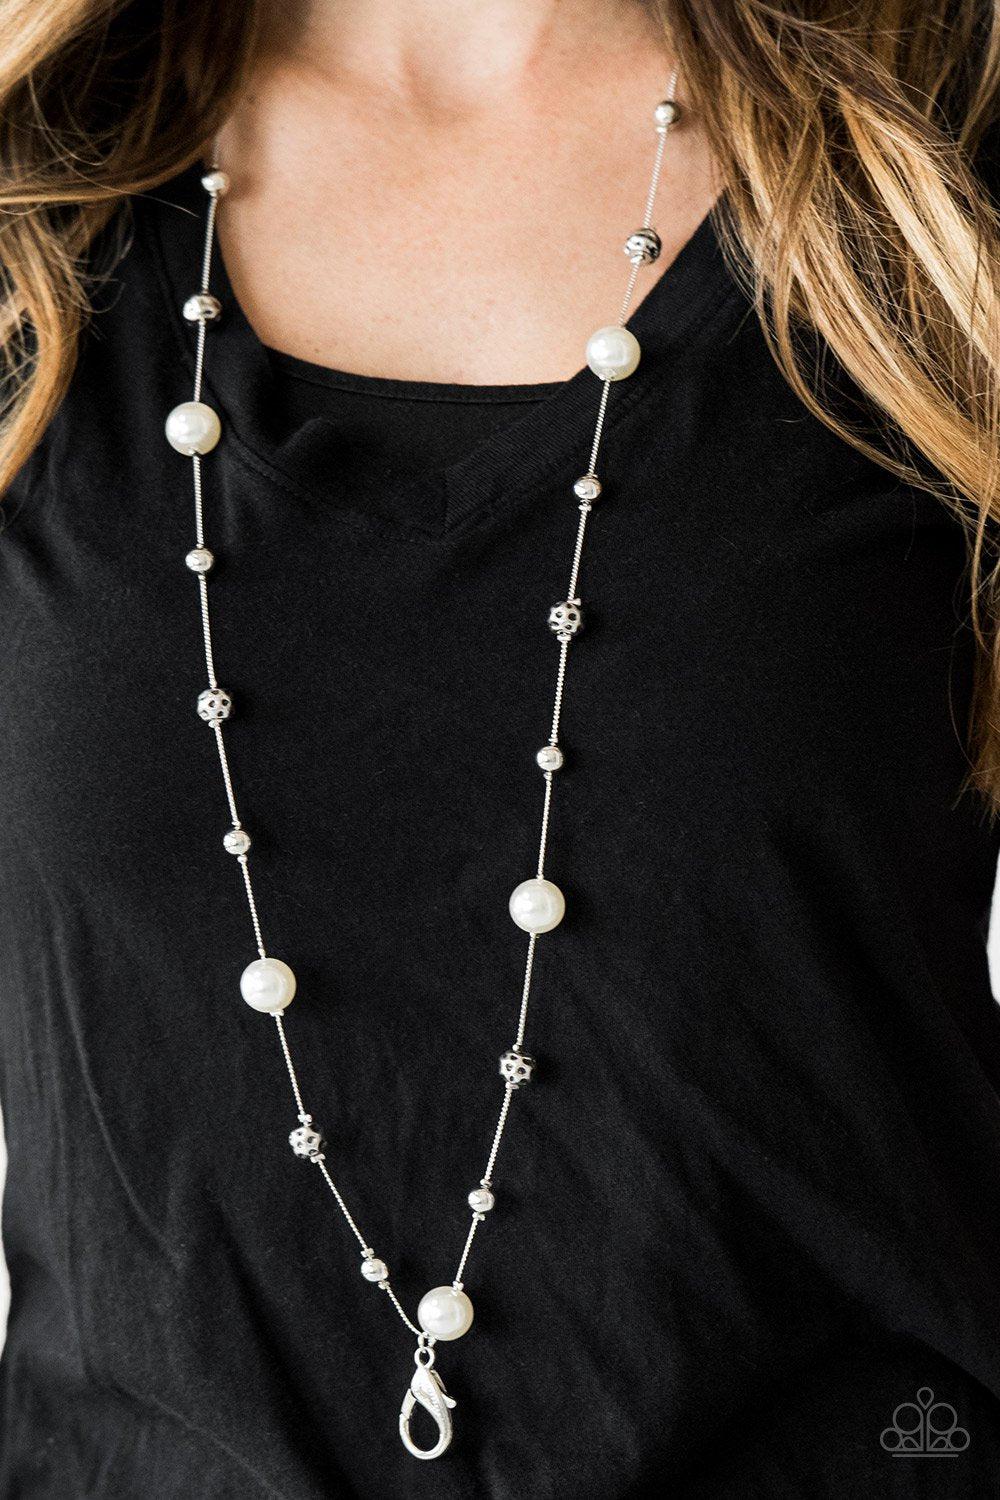 Eloquently Eloquent Silver and White Pearl Lanyard Necklace - Paparazzi Accessories-CarasShop.com - $5 Jewelry by Cara Jewels